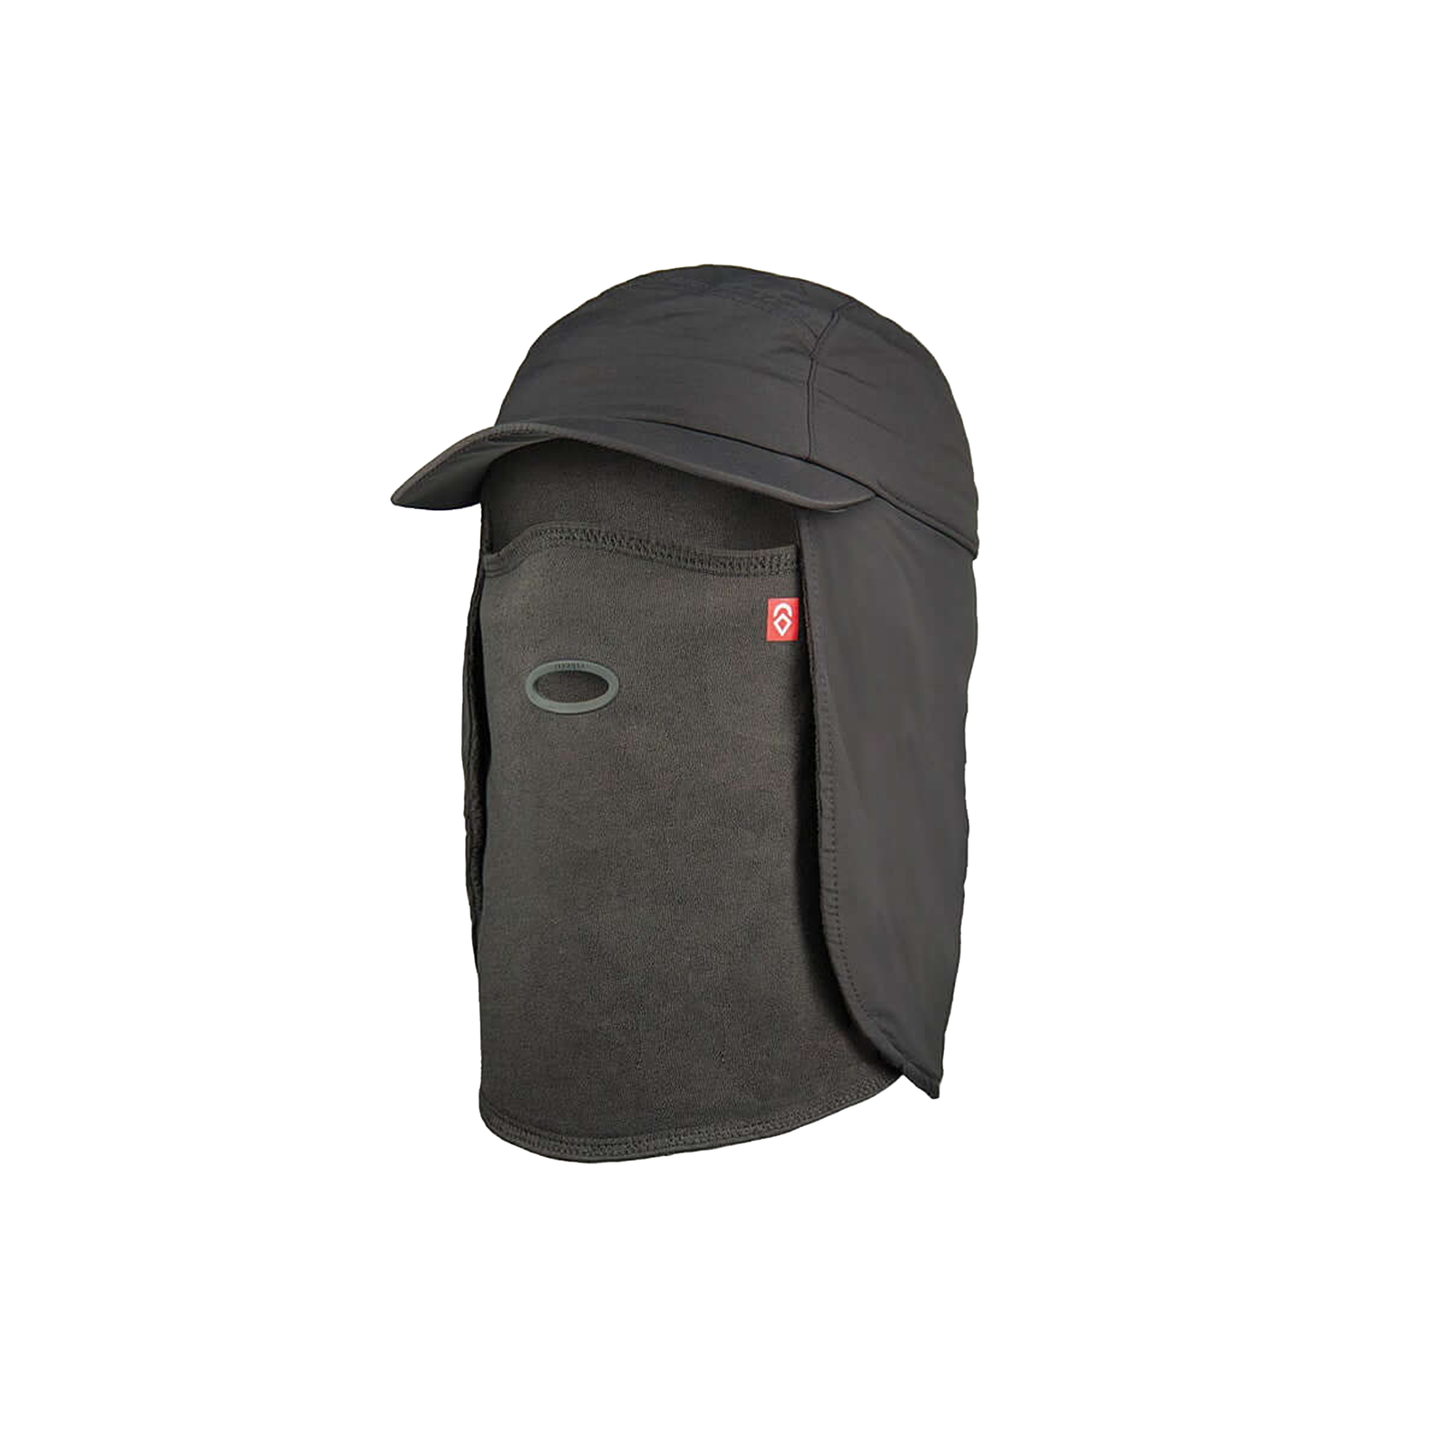 Airhole 5 Panel 3 Layer Charcoal S\M Neck Warmers & Face Masks